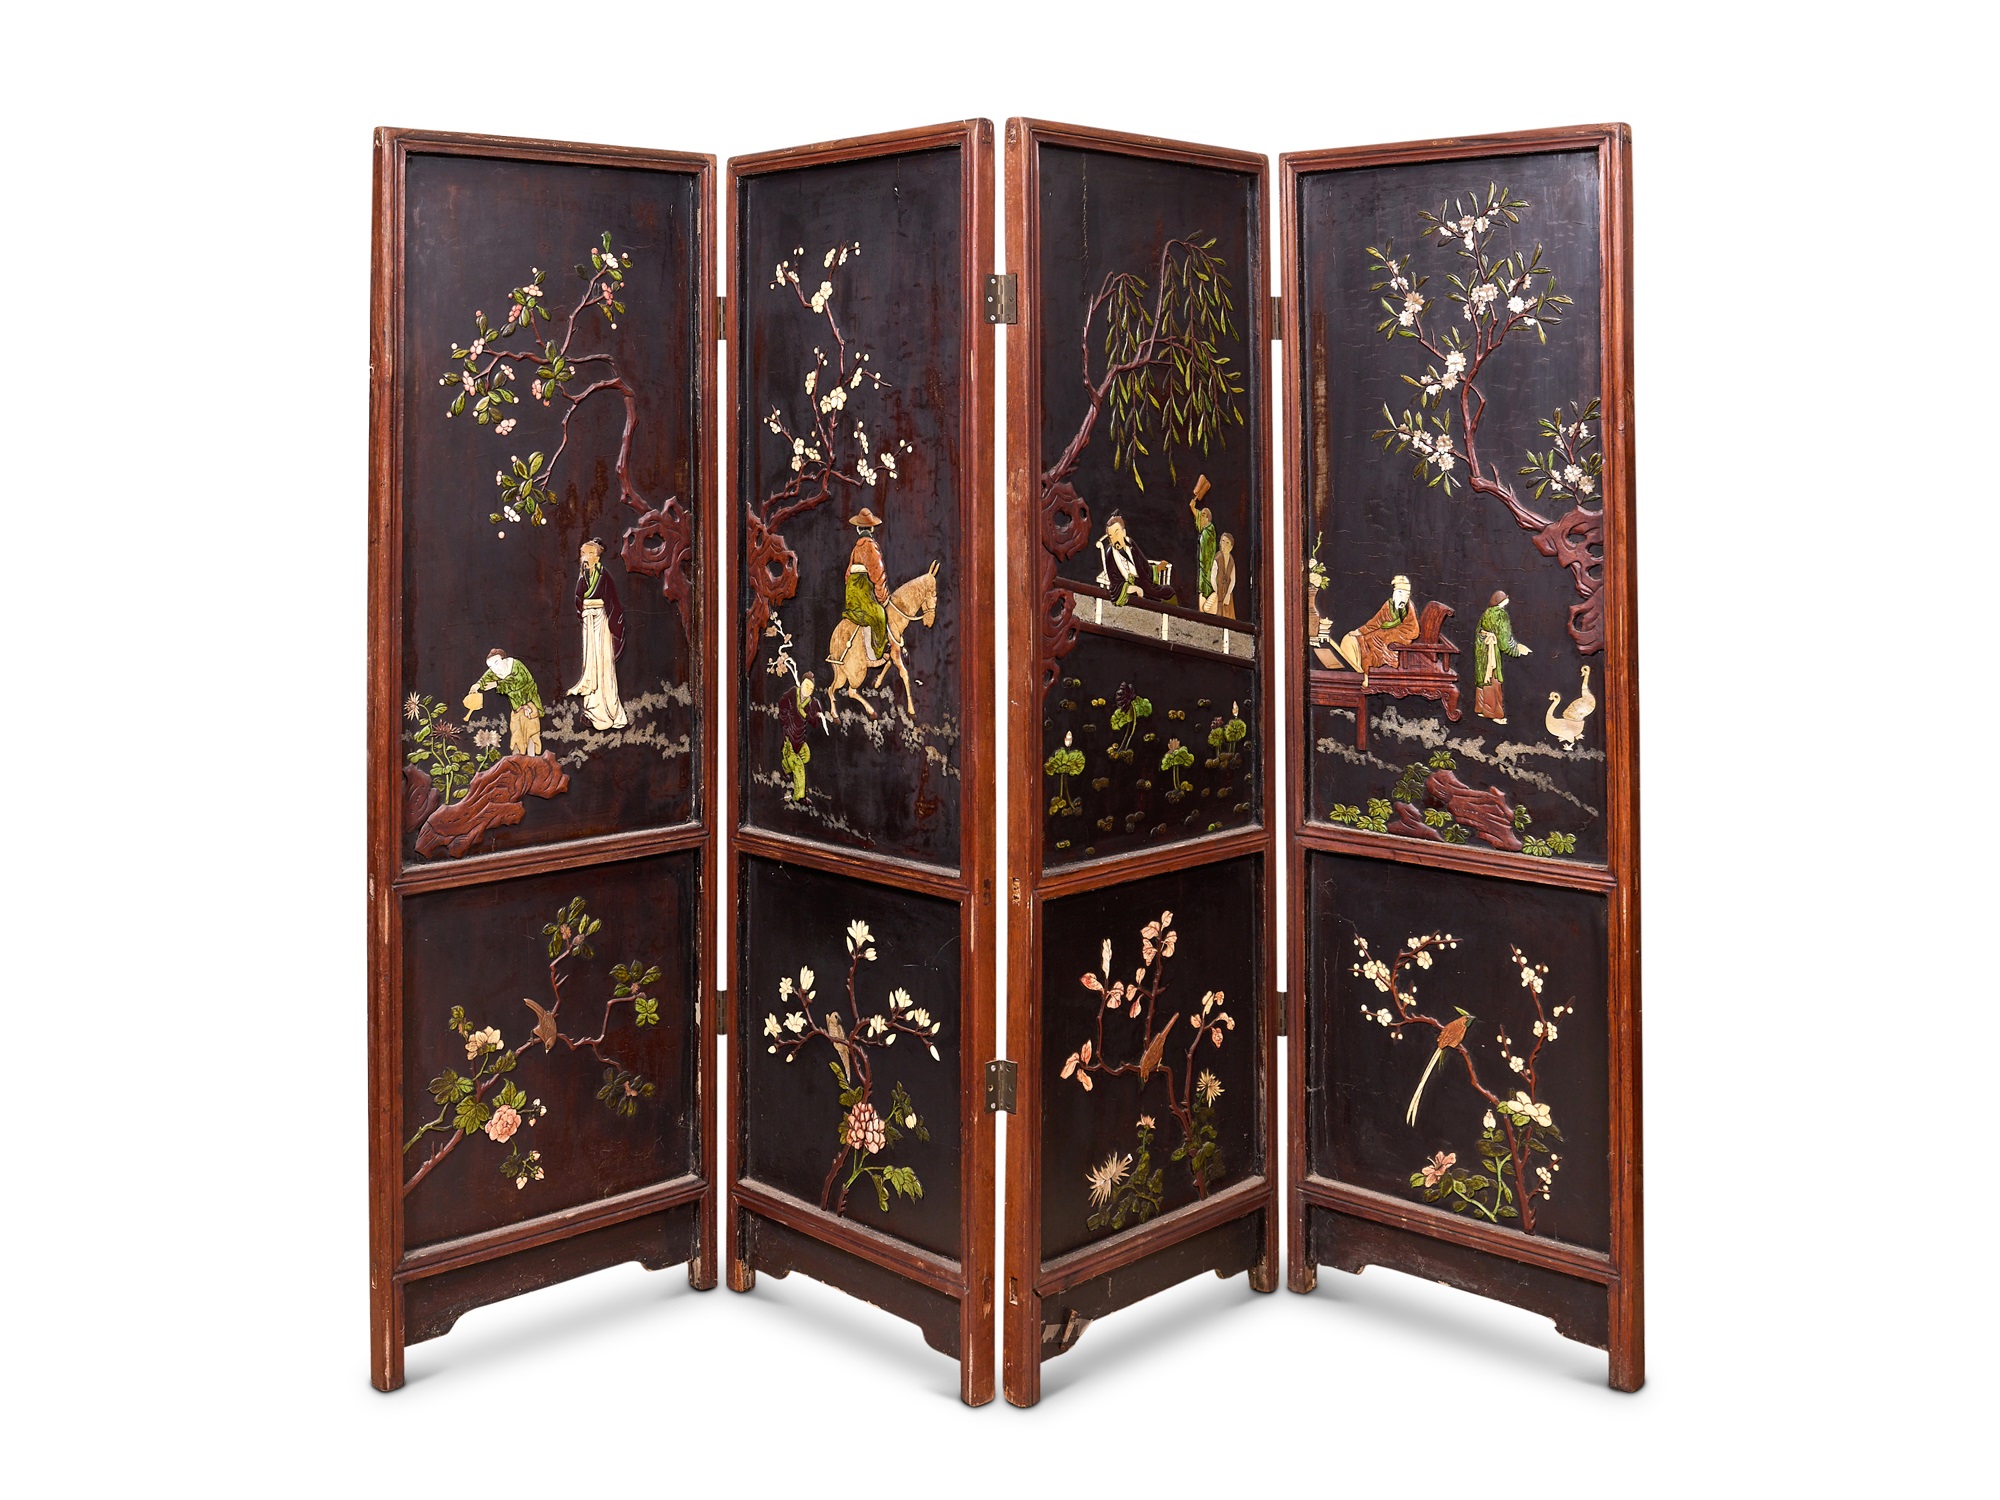 A JAPANESE HARDWOOD, HARDSTONE AND MOTHER OF PEARL MOUNTED FOUR PANEL SCREEN